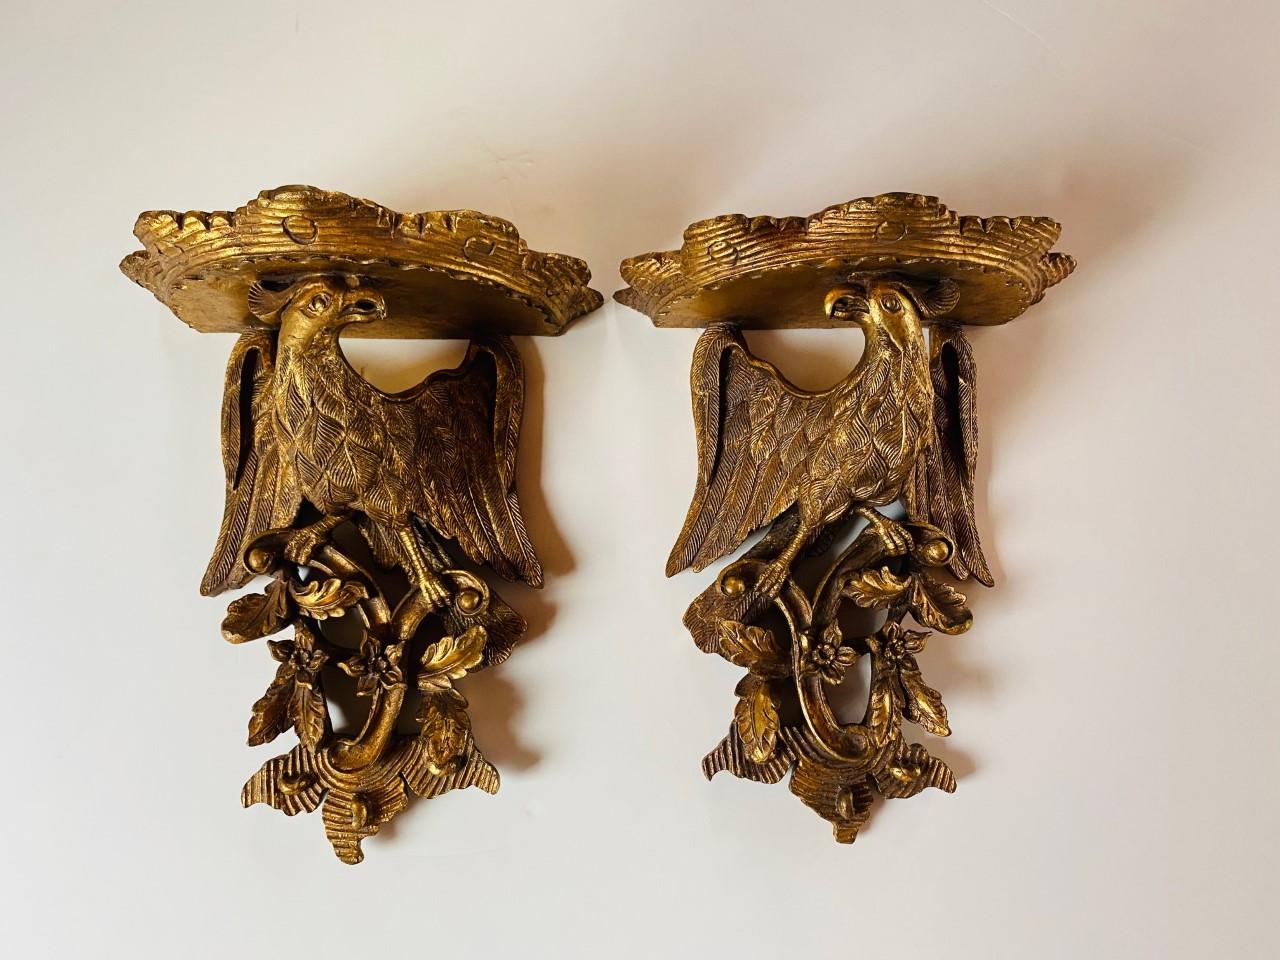 Hollywood Regency Antique Pair of Imperial Eagle Carved Wall Shelf Sconce Brackets